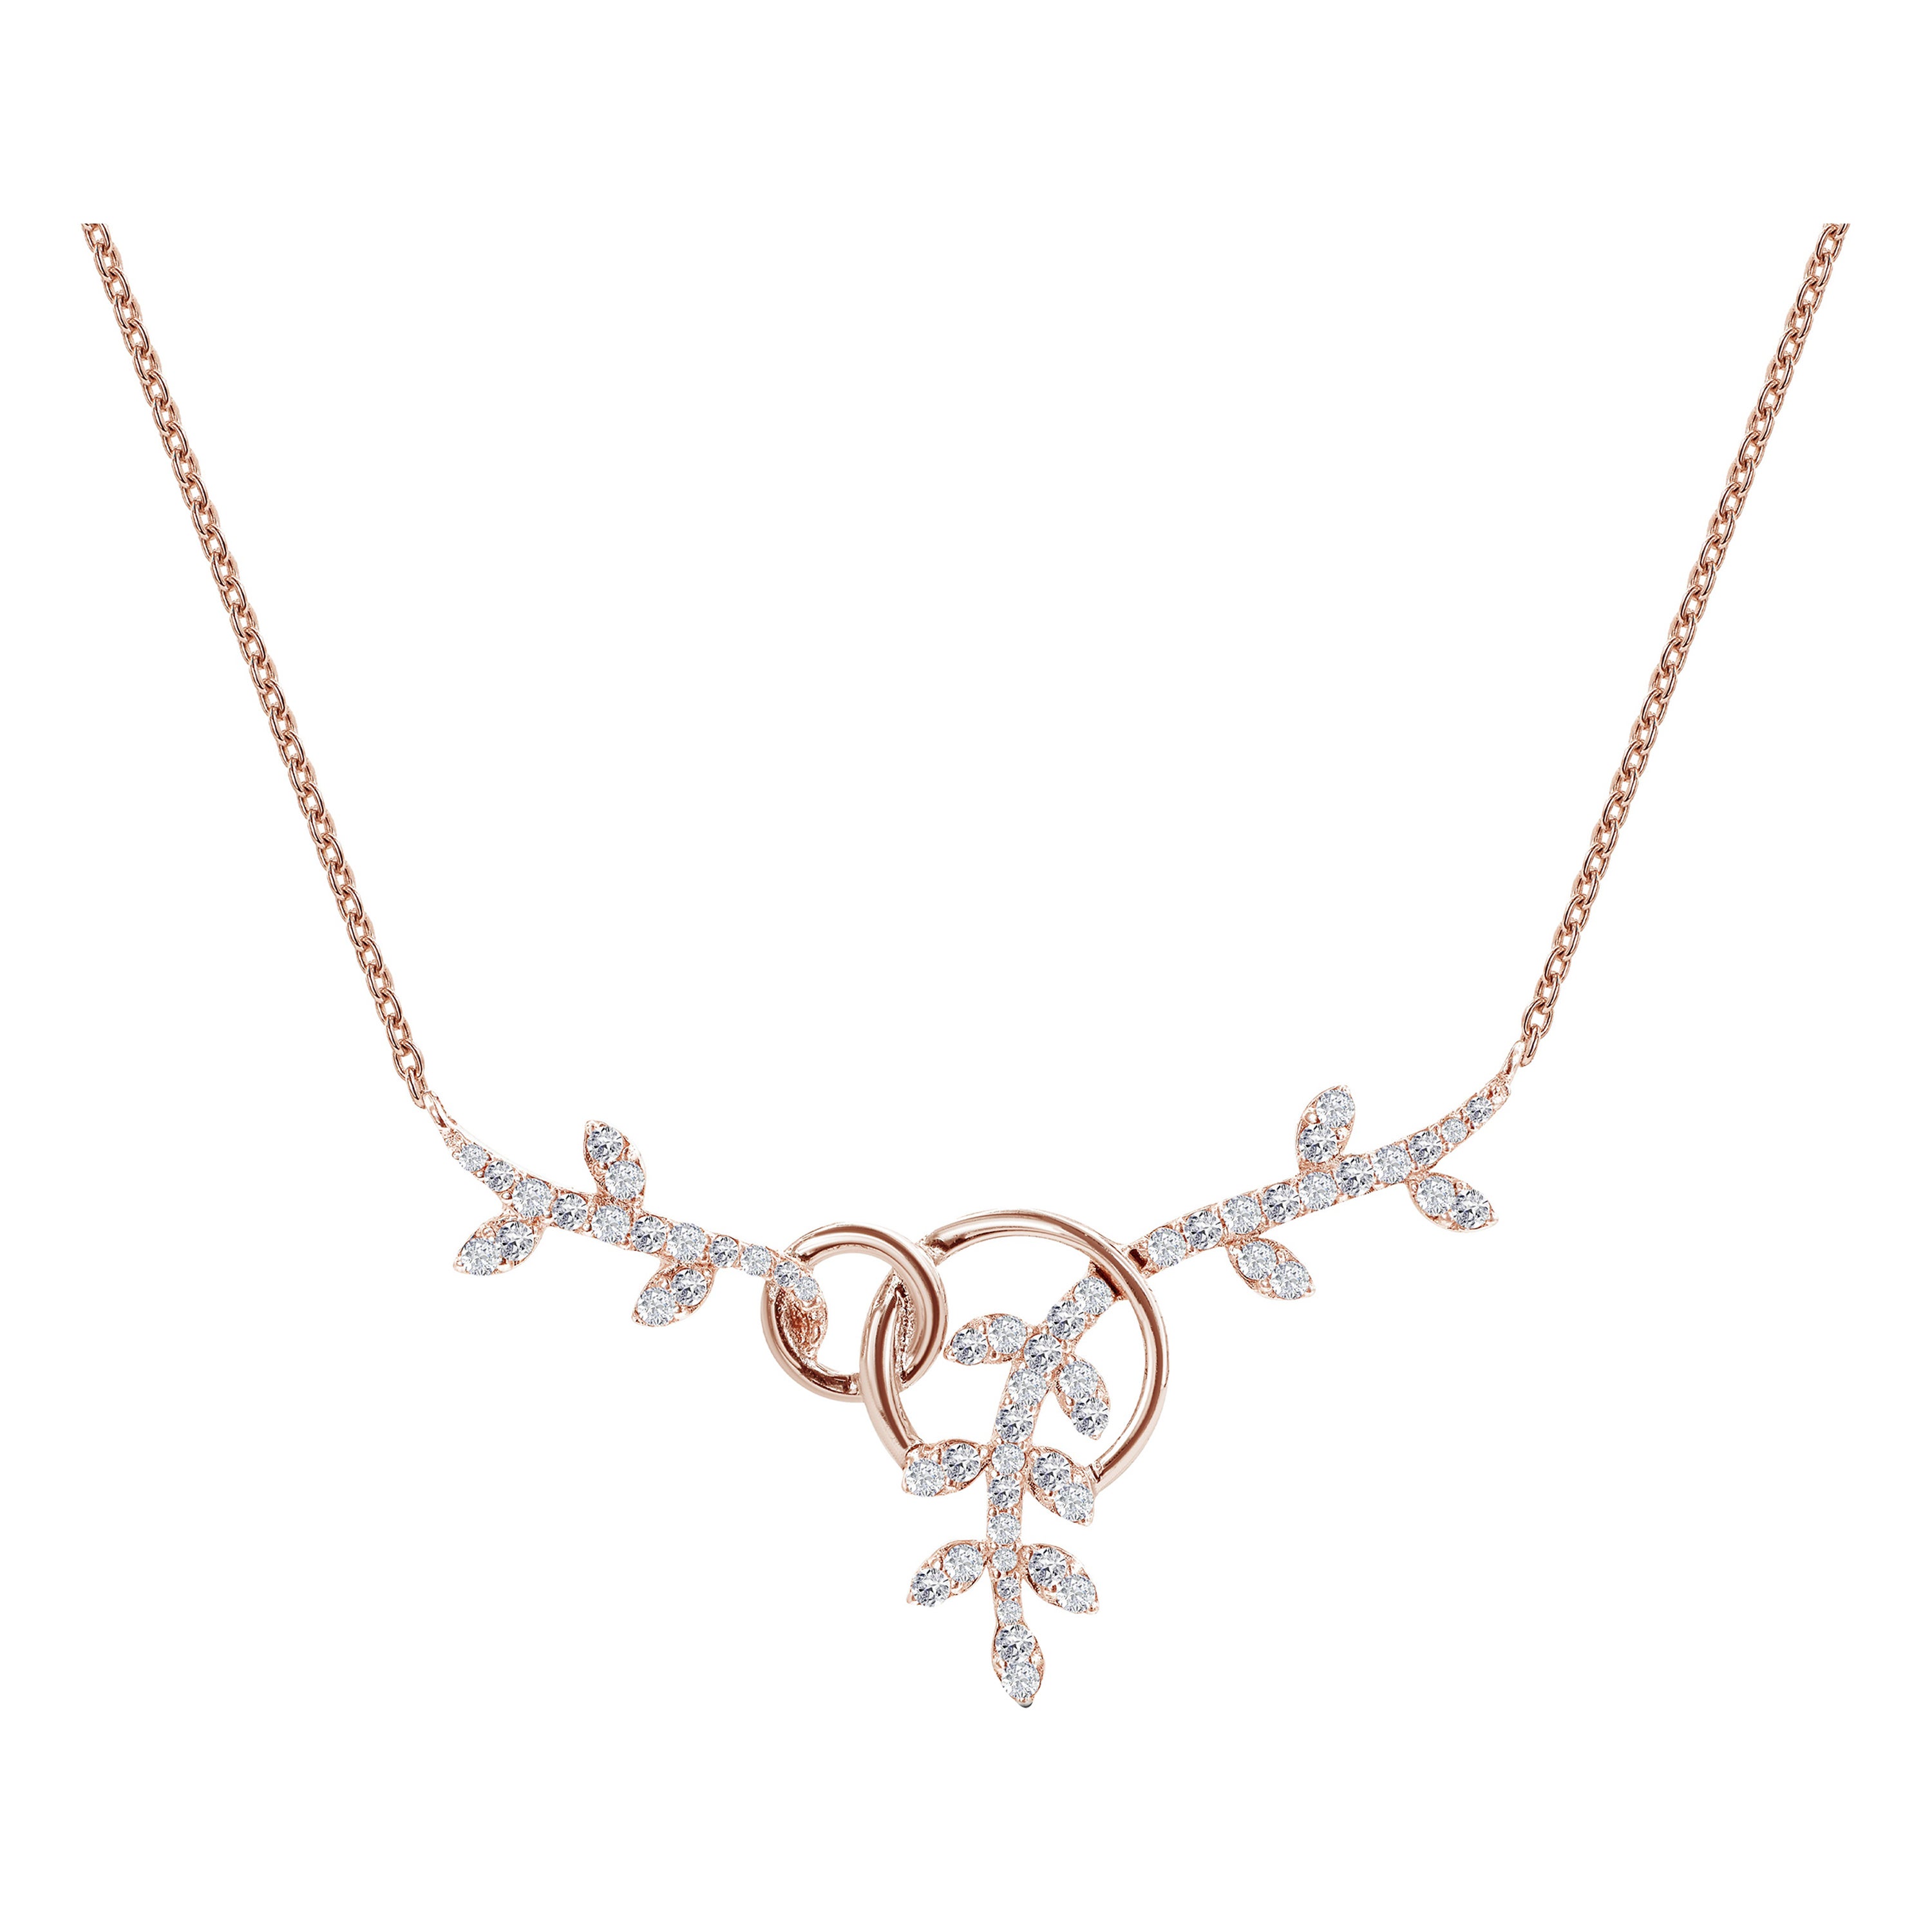 0.41 Ct Diamond Leaf Necklace in 18K Gold